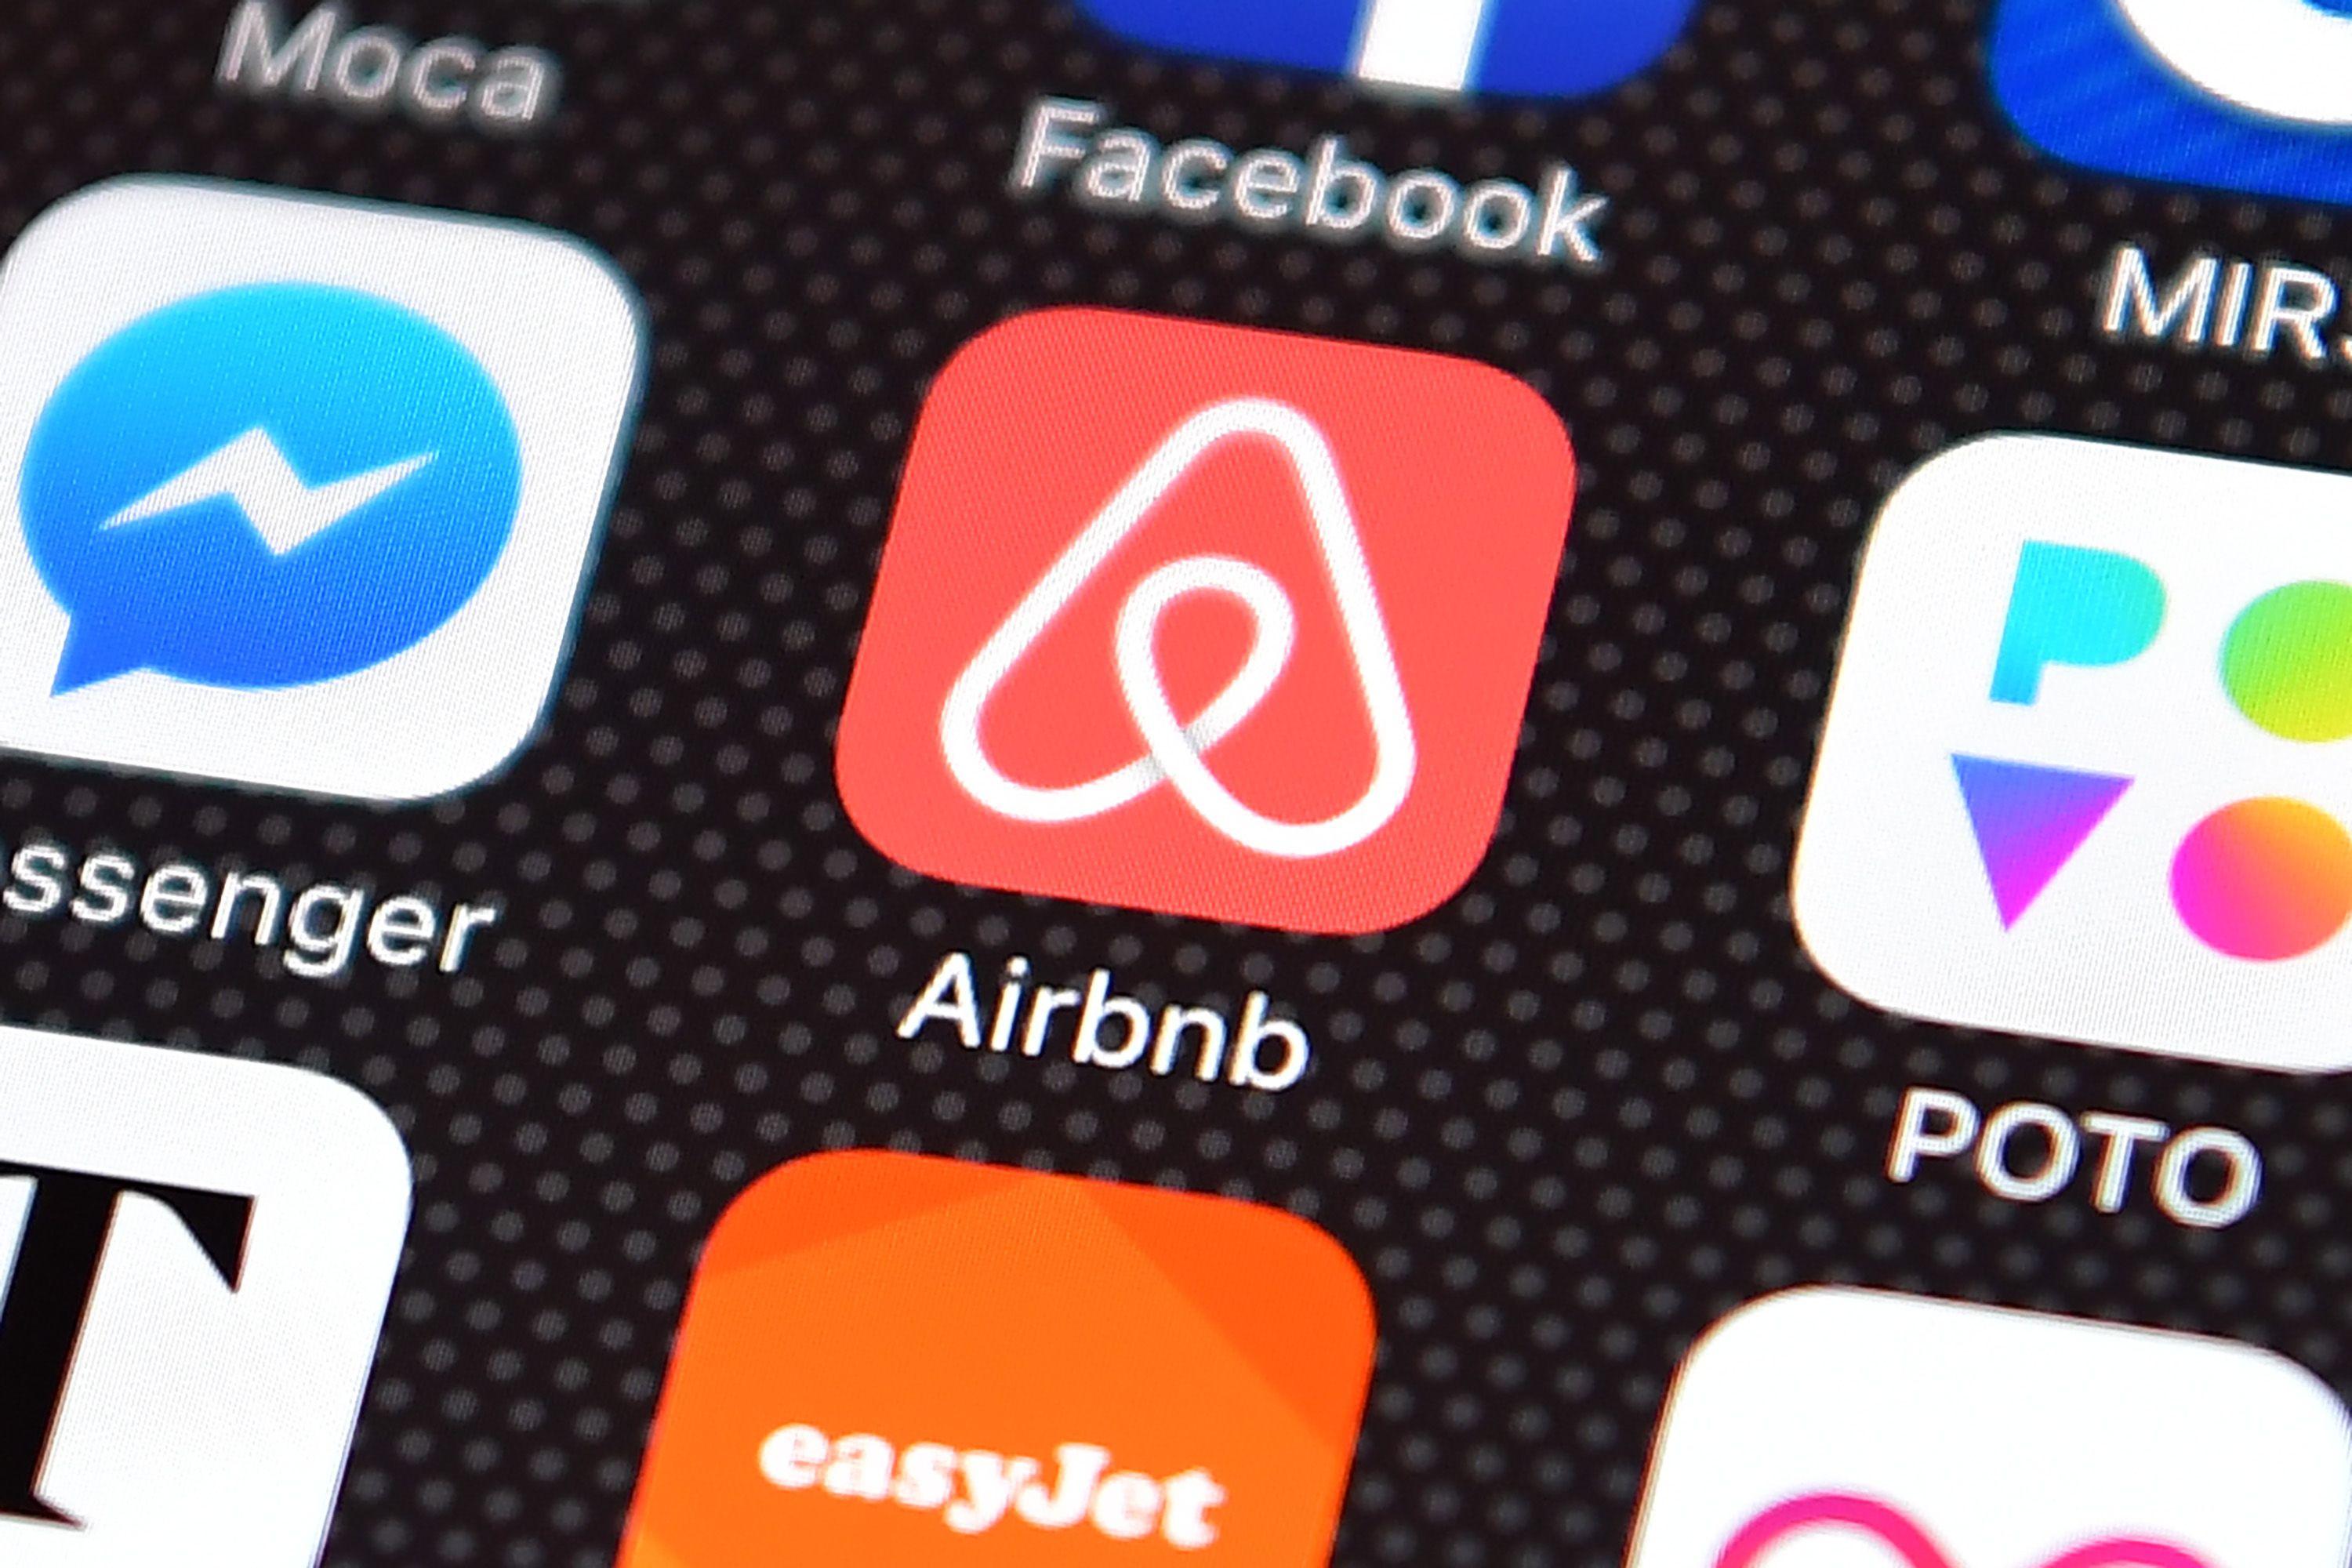 Airbnb App Logo - Renting an Airbnb Could Be Risky For Your Safety, Study Says